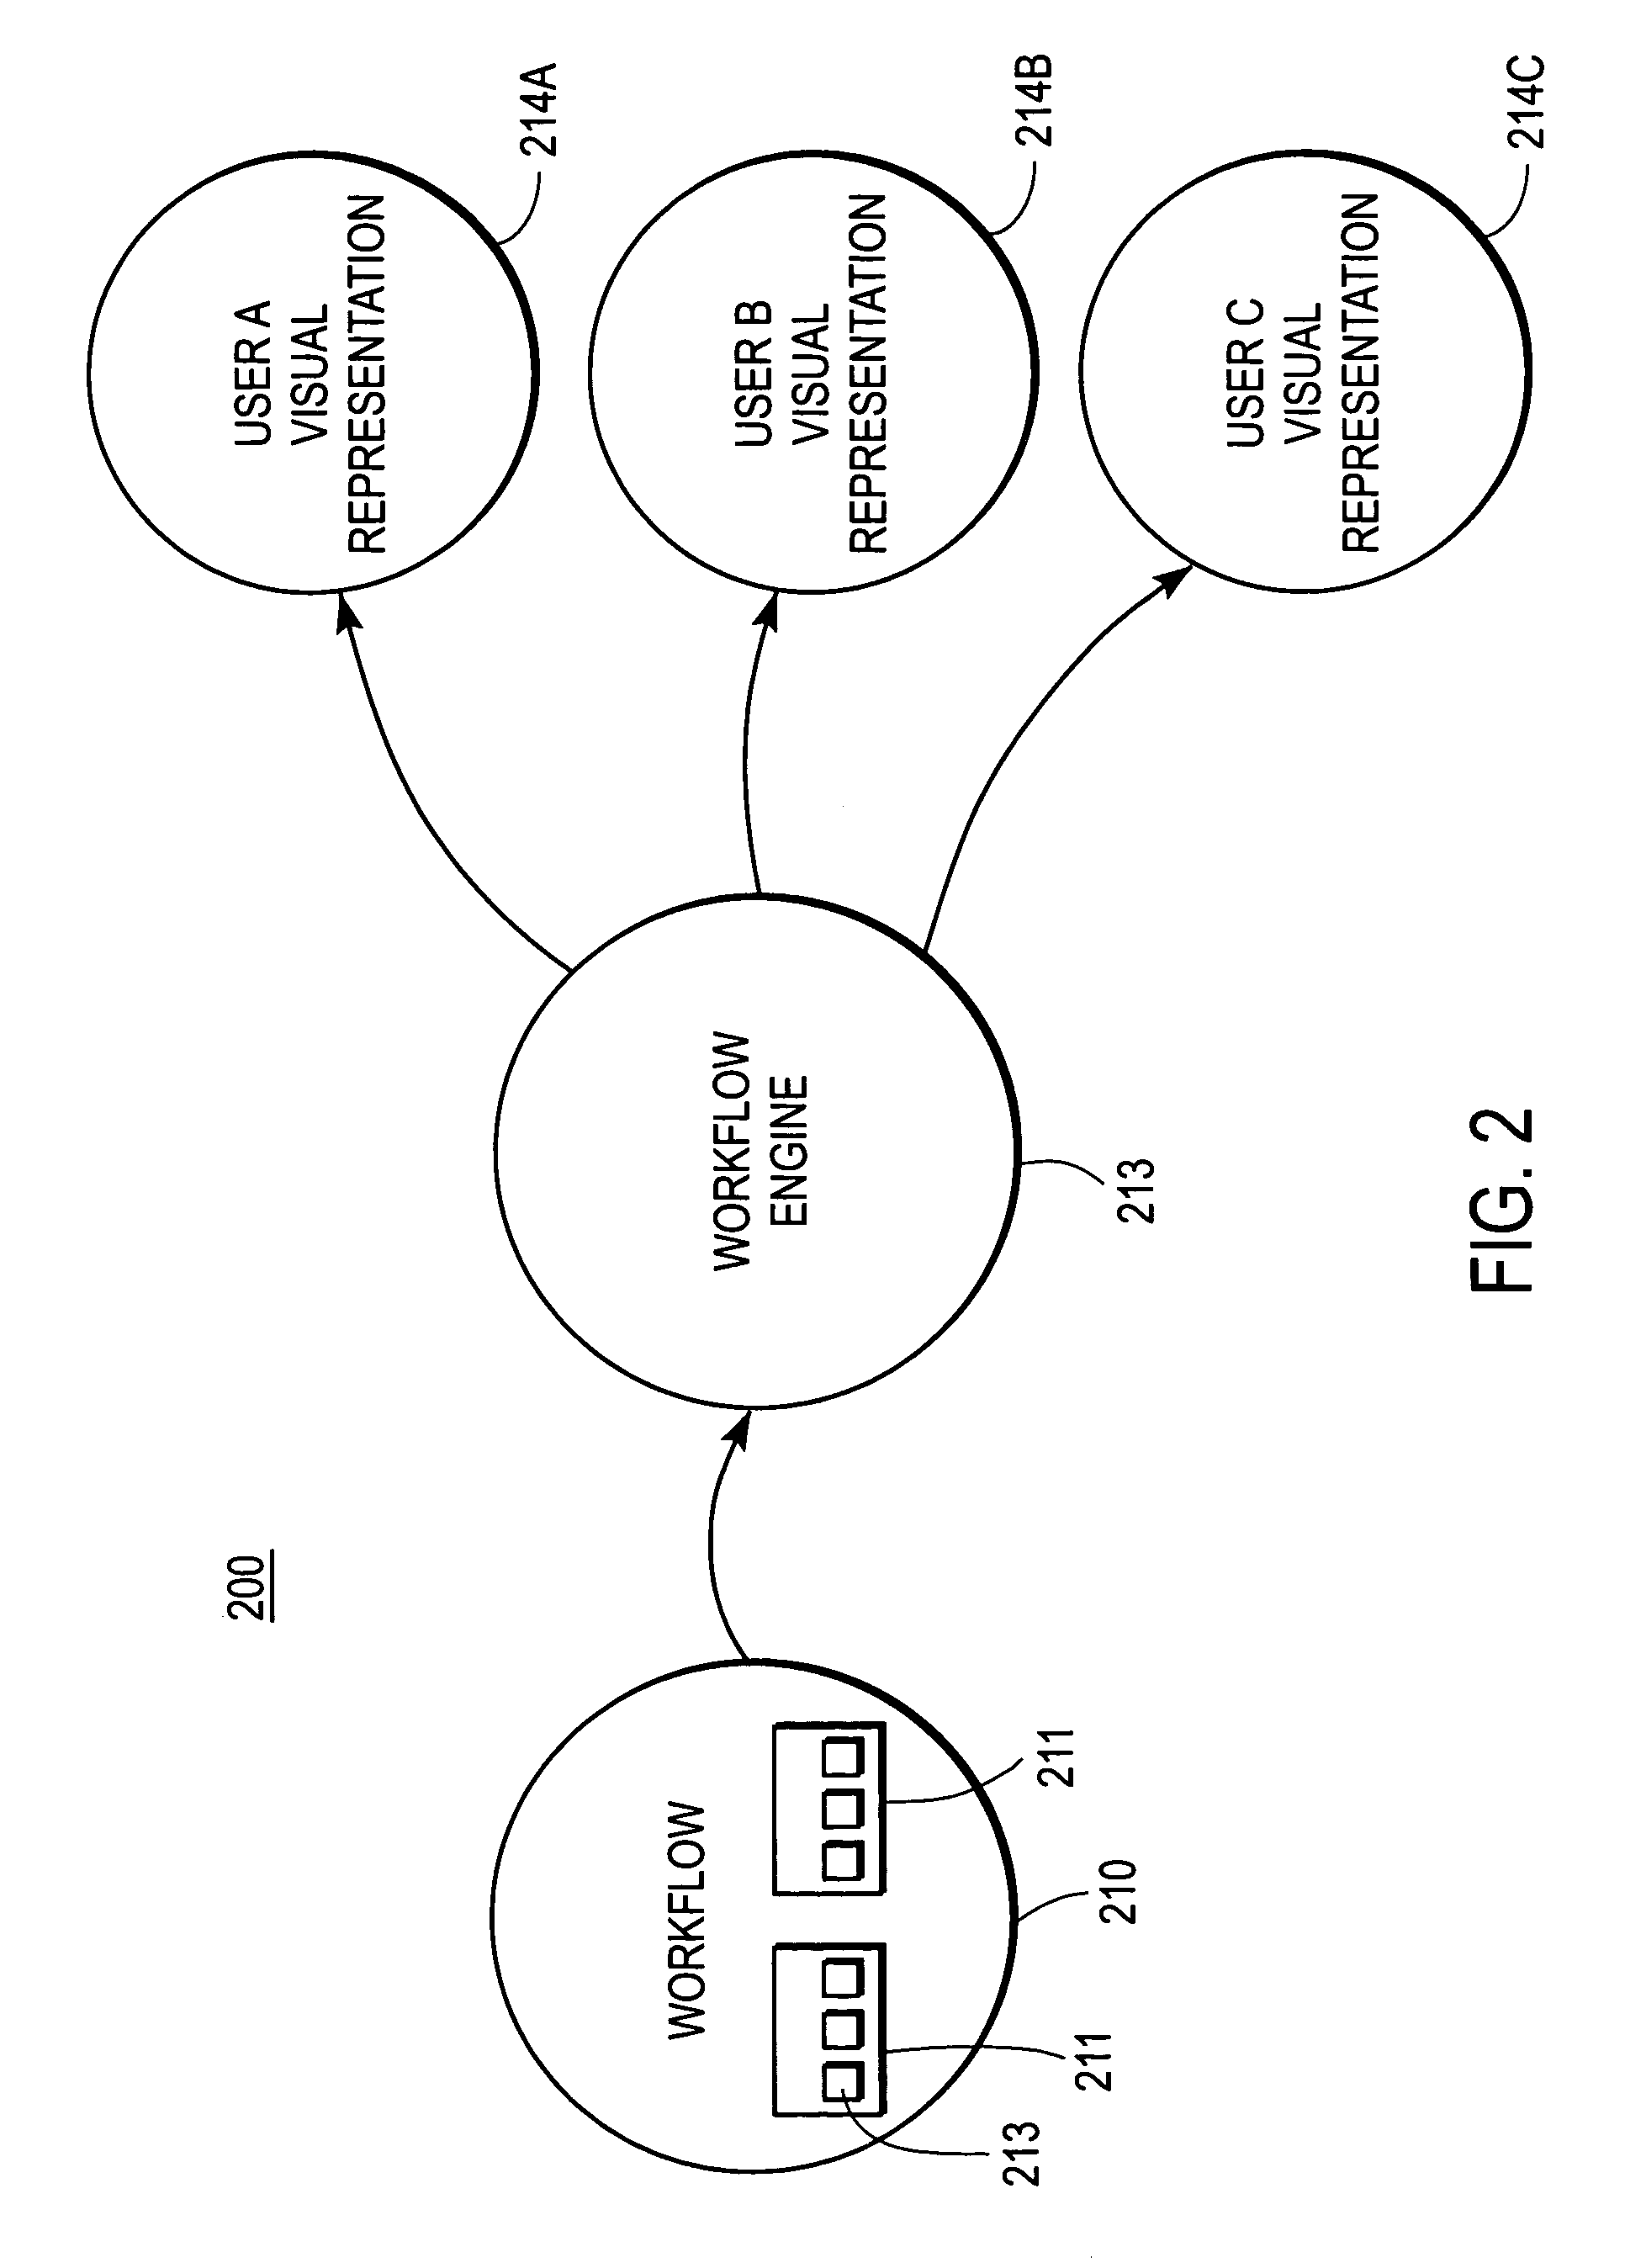 Information system supporting customizable user interfaces and process flows